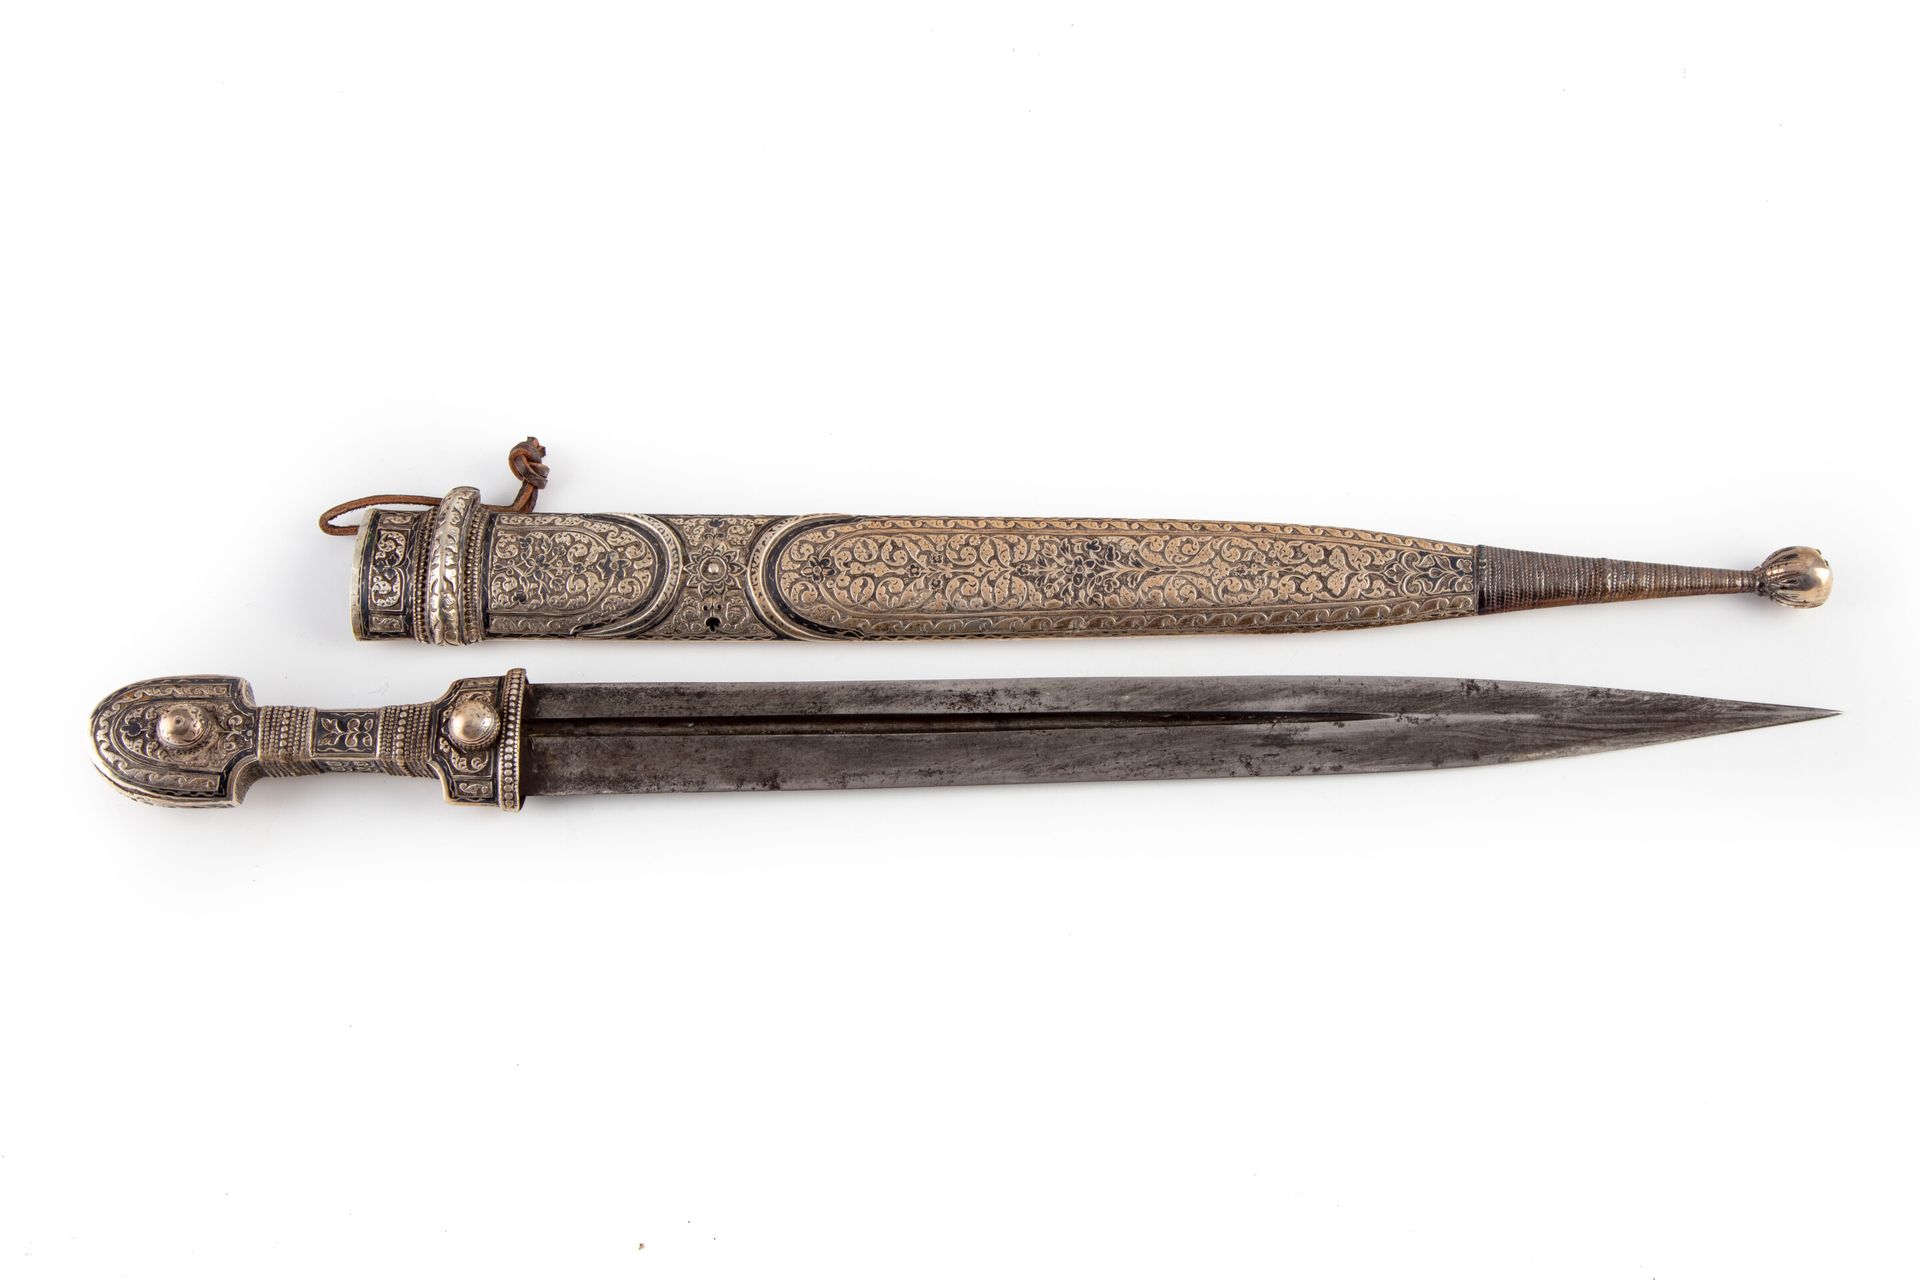 KINDJAL CAUCASIEN CAUCASIAN KINDJAL

Wooden handle covered with silver (?) richl&hellip;